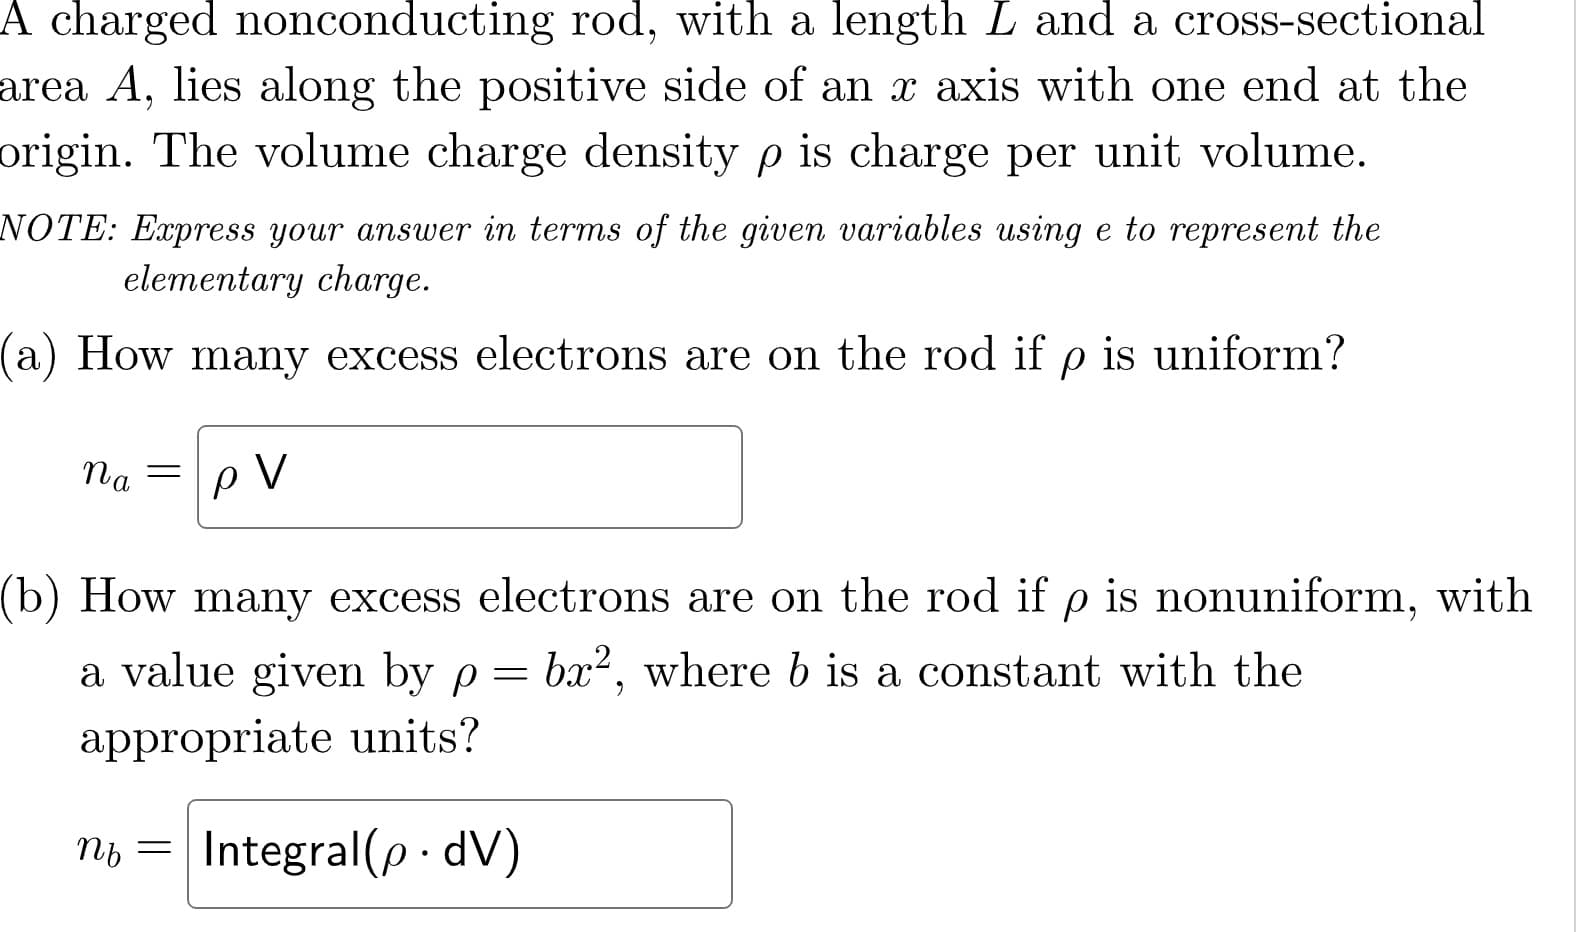 A charged nonconducting rod, with a length L and a cross-sectional
area A, lies along the positive side of an x axis with one end at the
origin. The volume charge density p is charge per unit volume.
NOTE: Express your answer in terms of the given variables using e to represent the
elementary charge.
a) How many excess electrons are on the rod if p is uniform?
